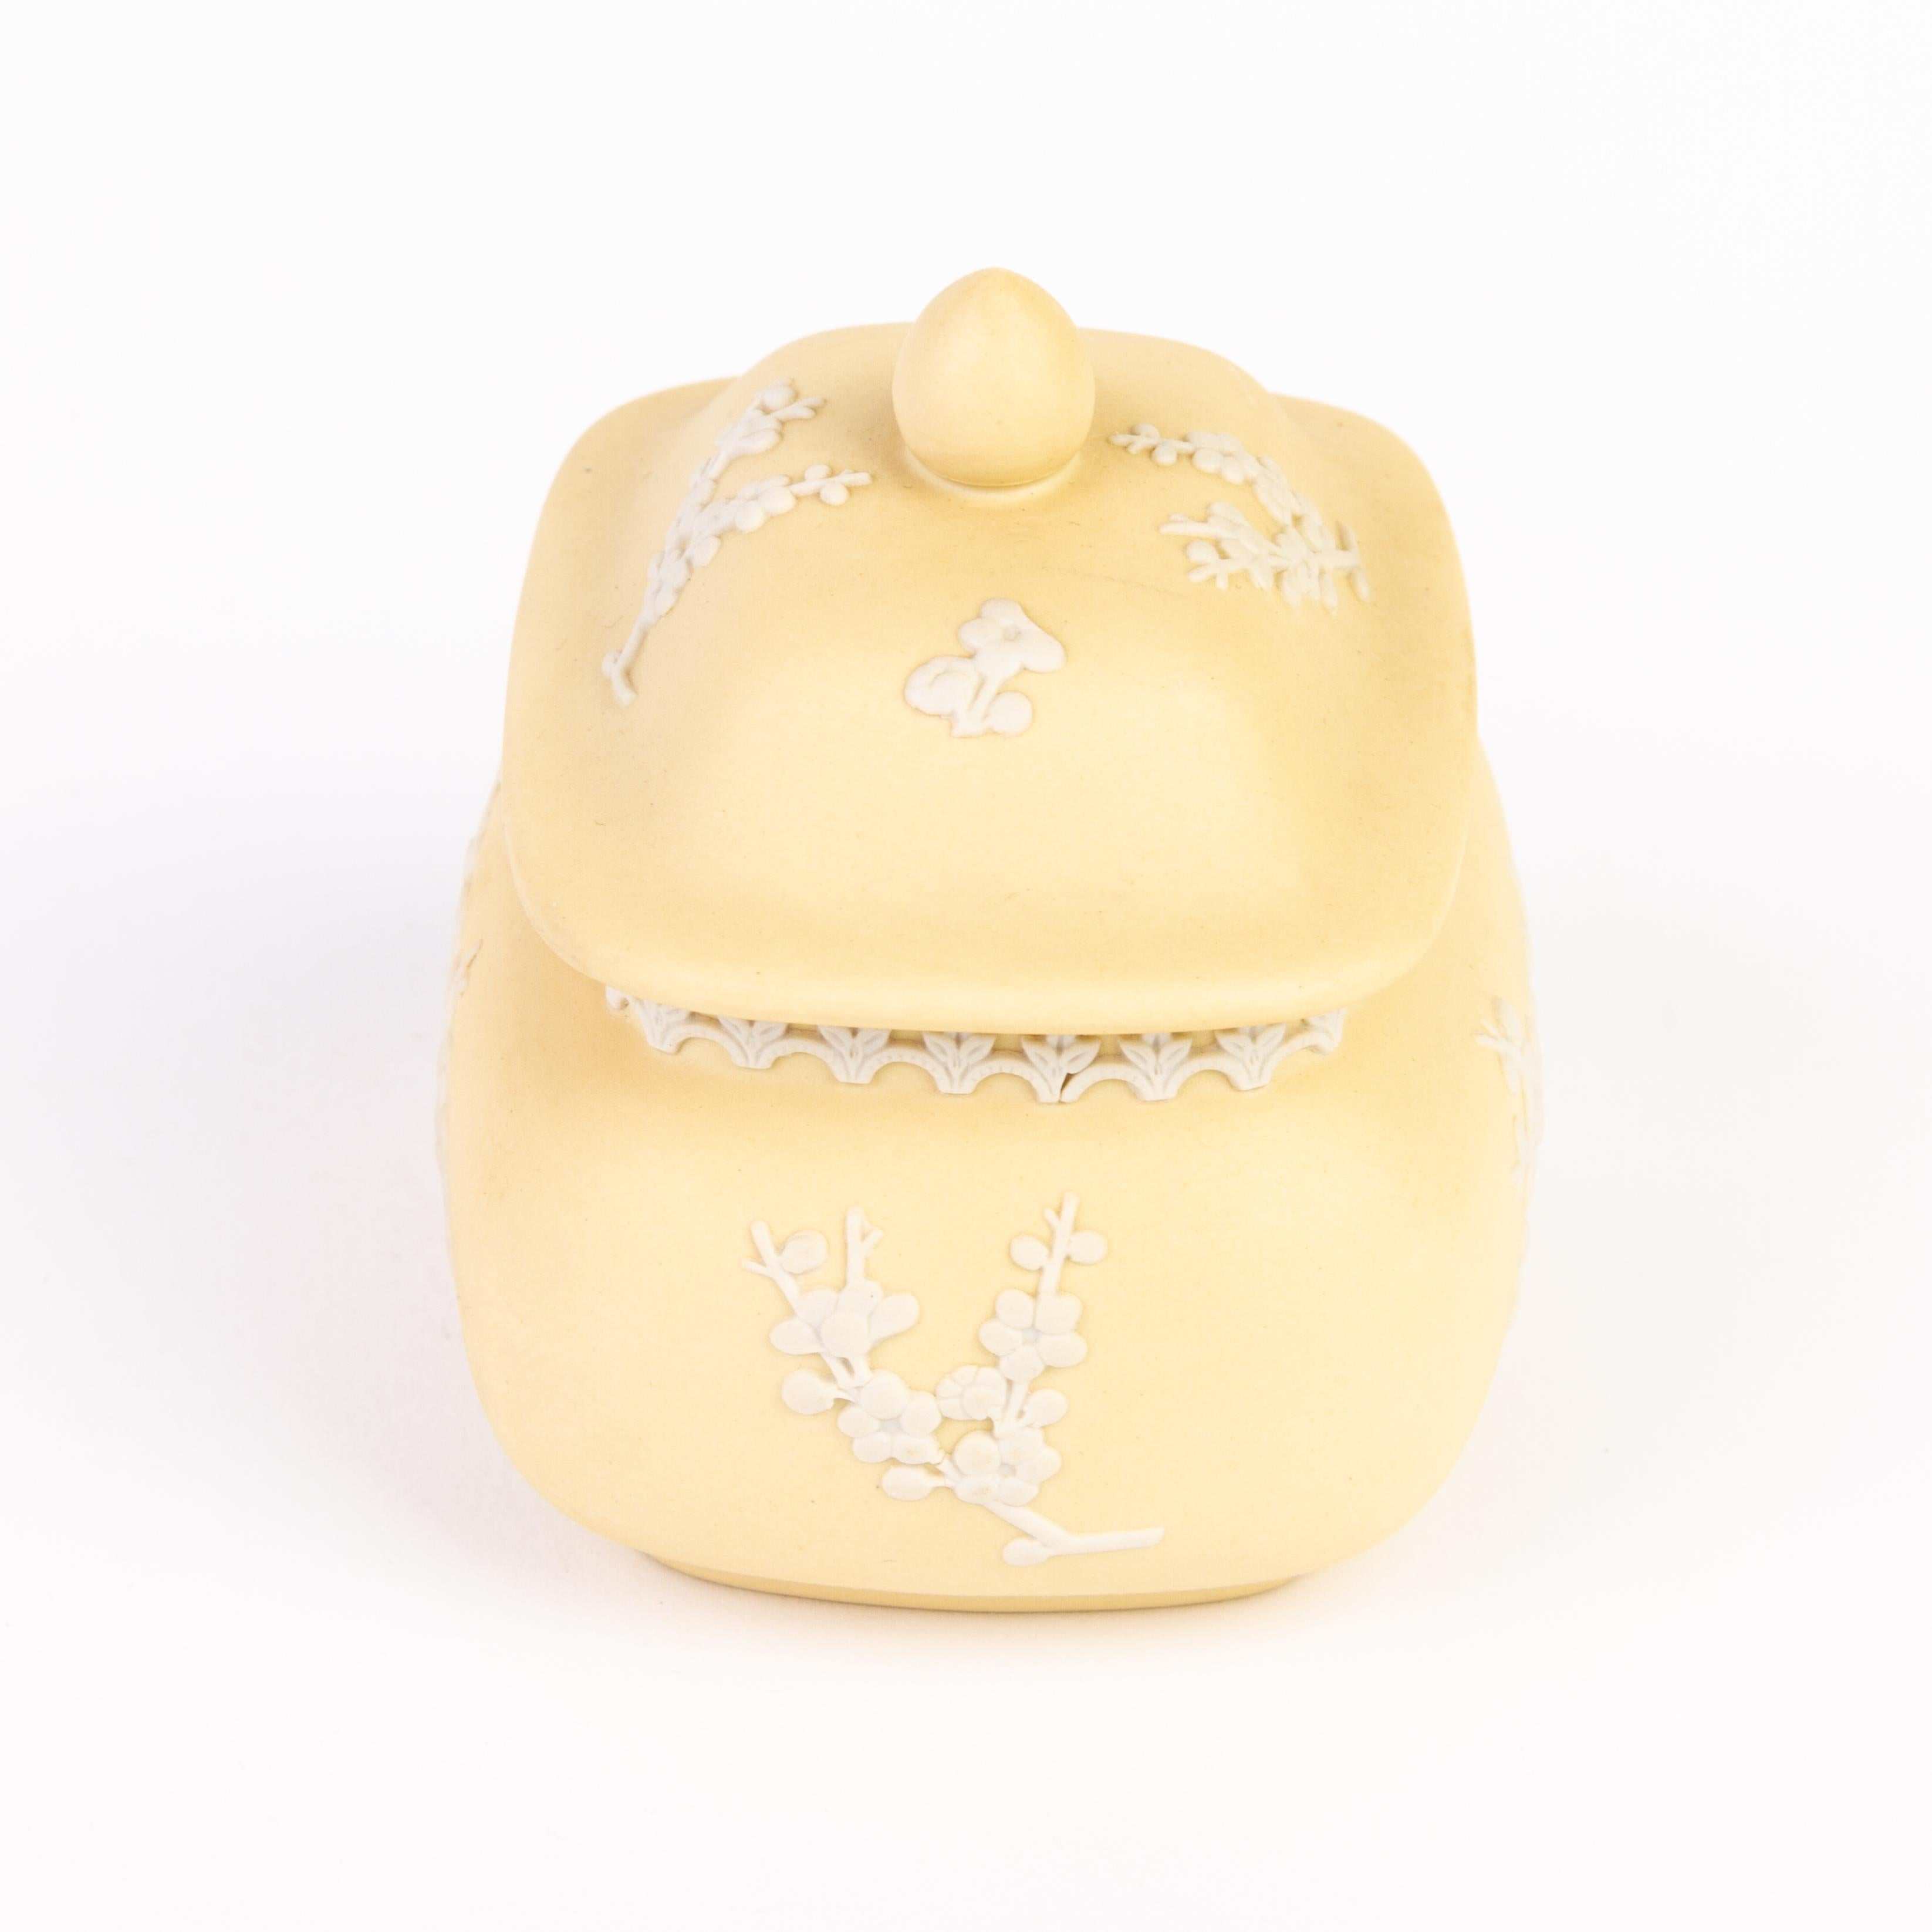 From a private collection.
Free international shipping.
Wedgwood Primrose Yellow Jasperware Prunus Lidded Box 